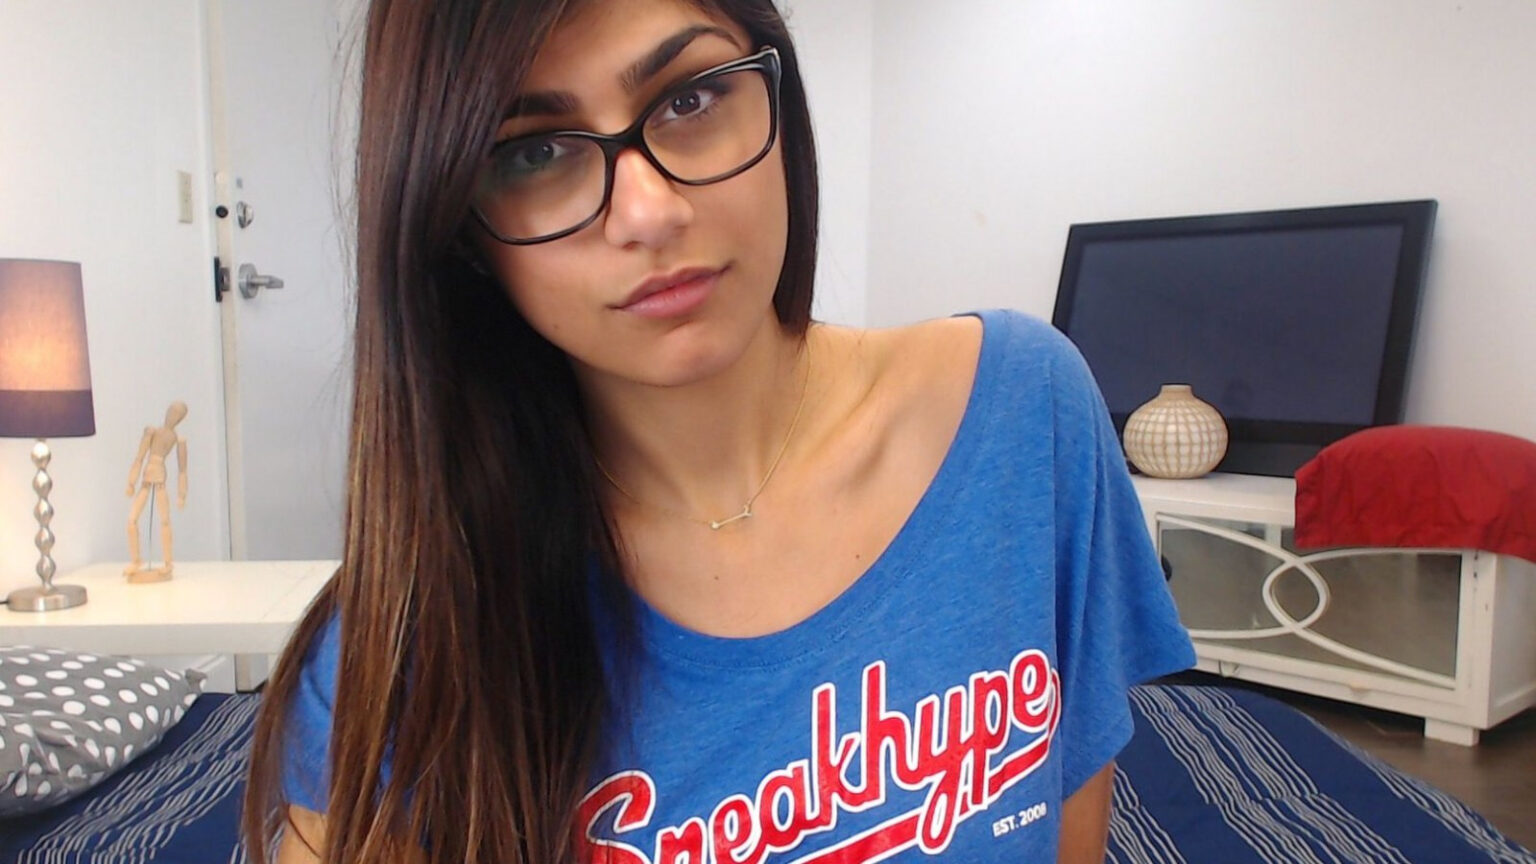 Adult actress turned social media star Mia Khalifa is absolutely killing it on IG, and she's looking hotter than ever. See her best posts here.